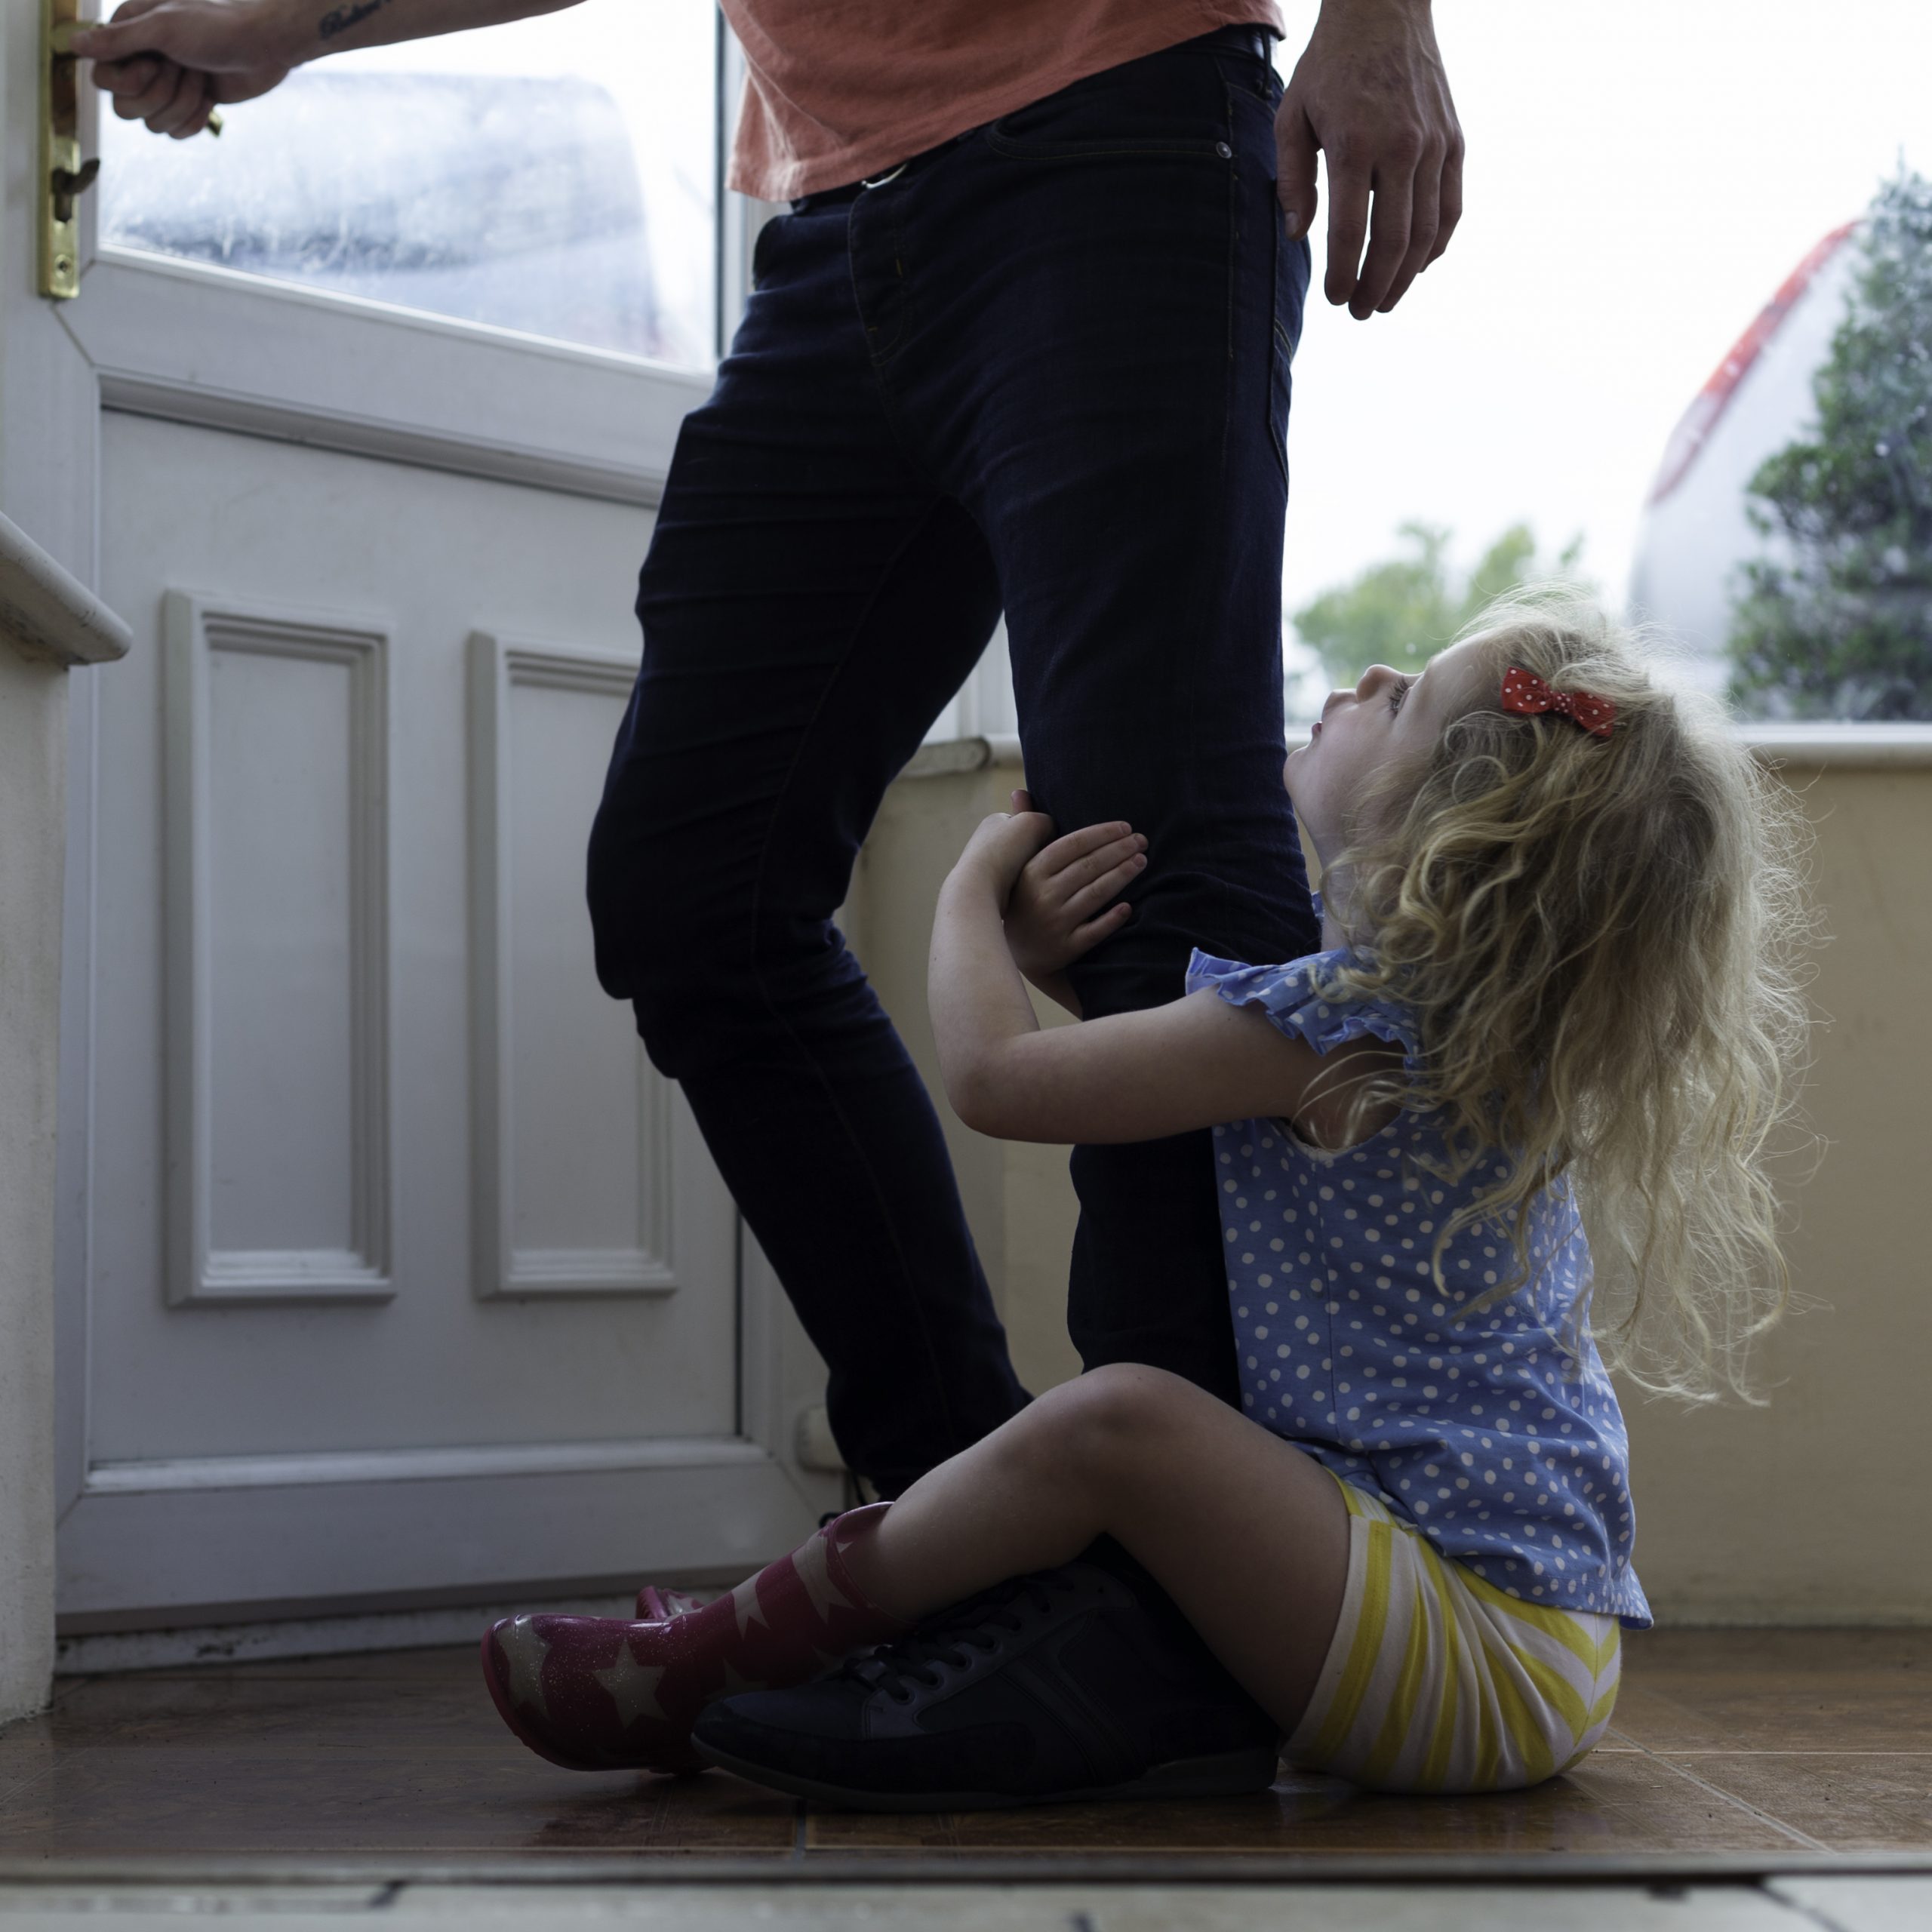 Helicopter Parenting Can Lead To Poor Self-regulation in Children